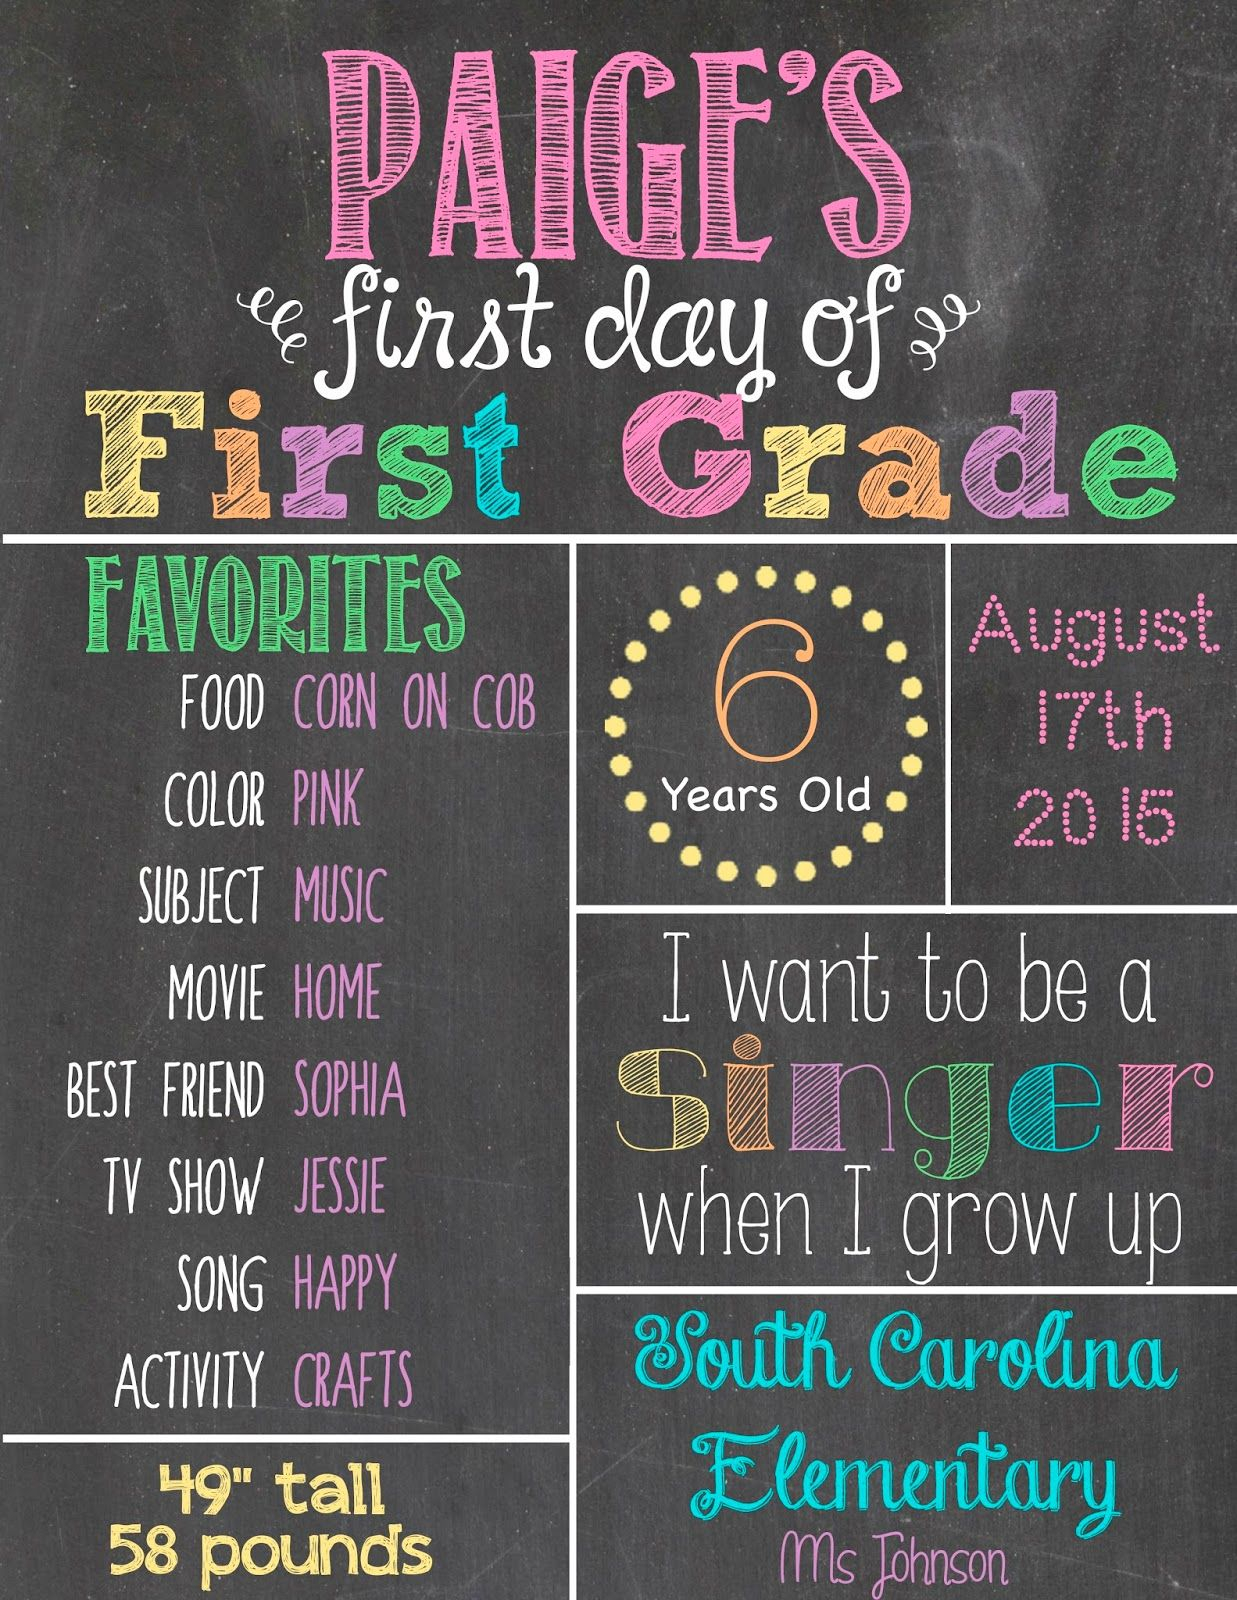 First Day Of School Template